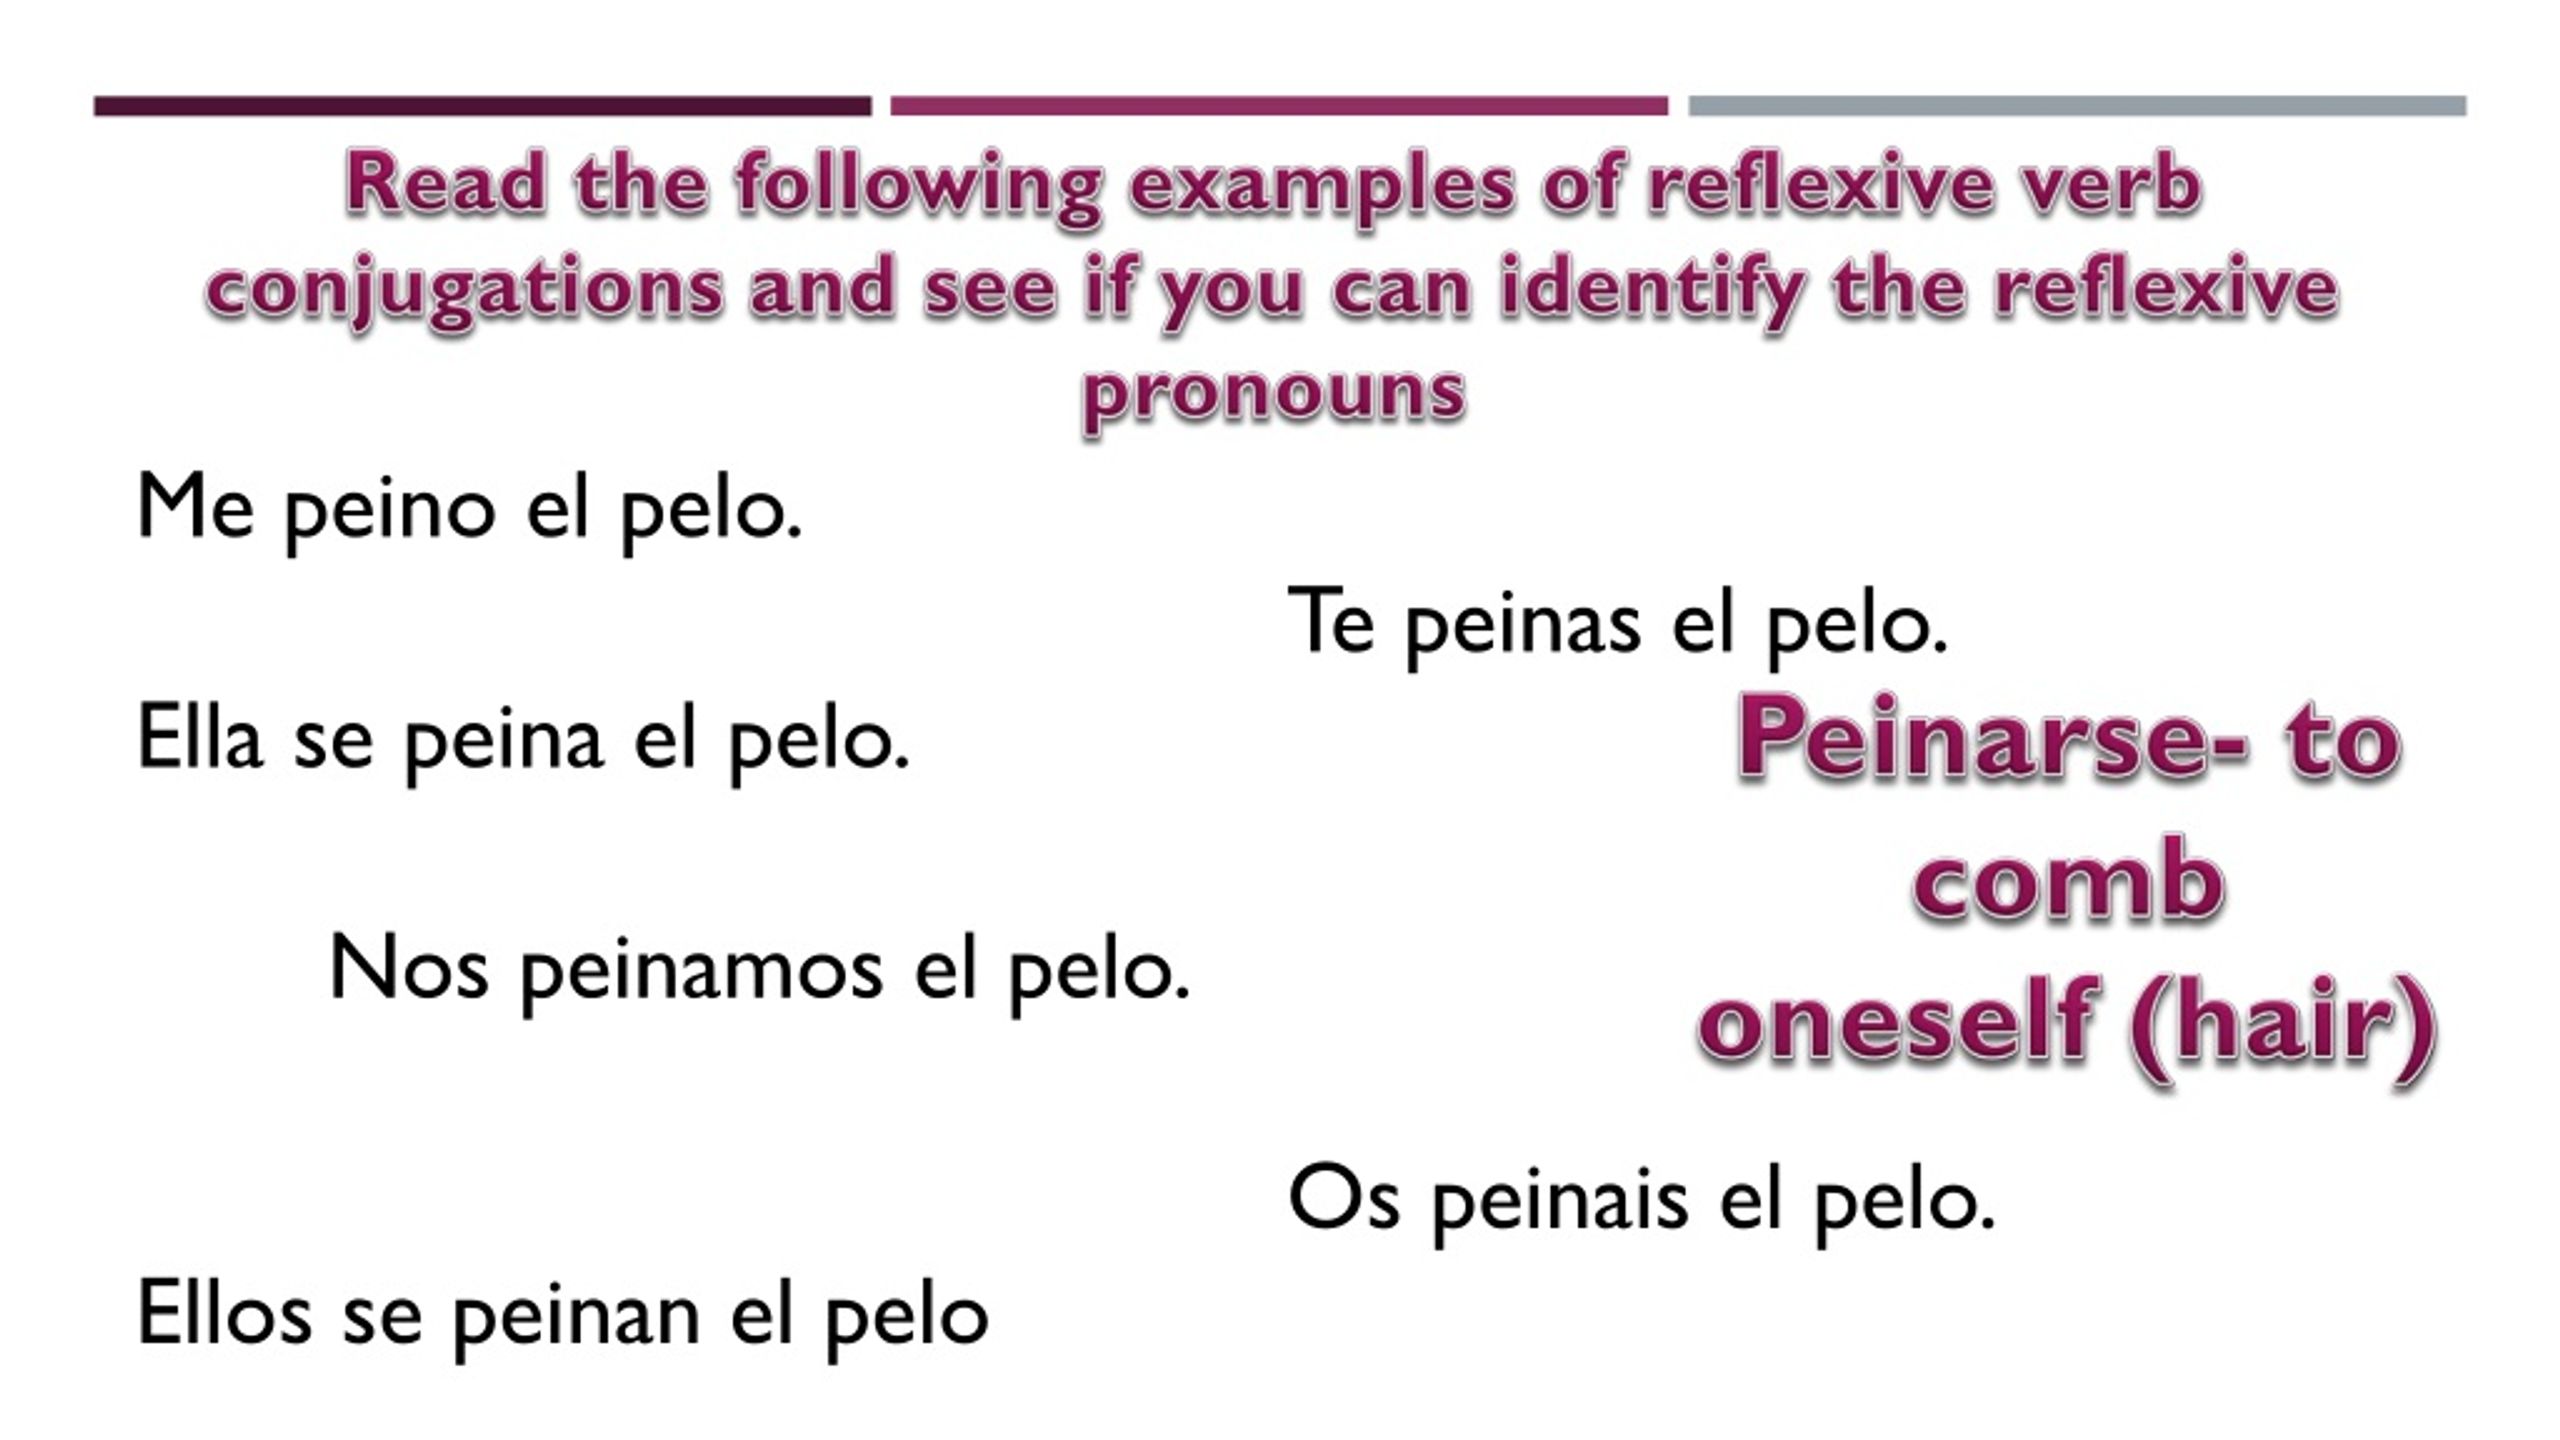 what is a reflexive verb